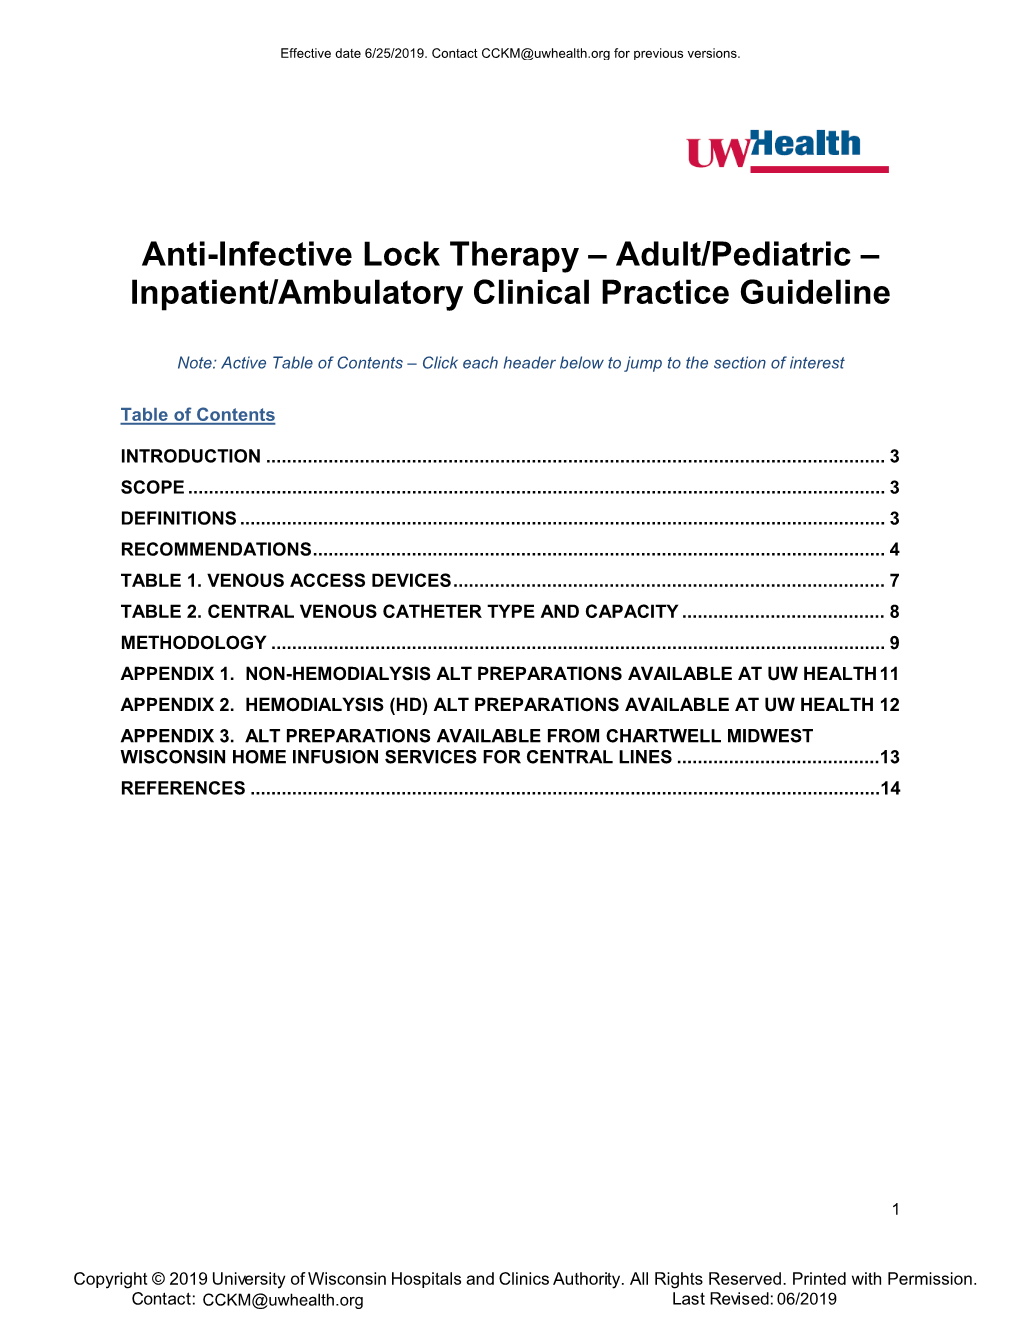 Anti-Infective Lock Therapy – Adult/Pediatric – Inpatient/Ambulatory Clinical Practice Guideline